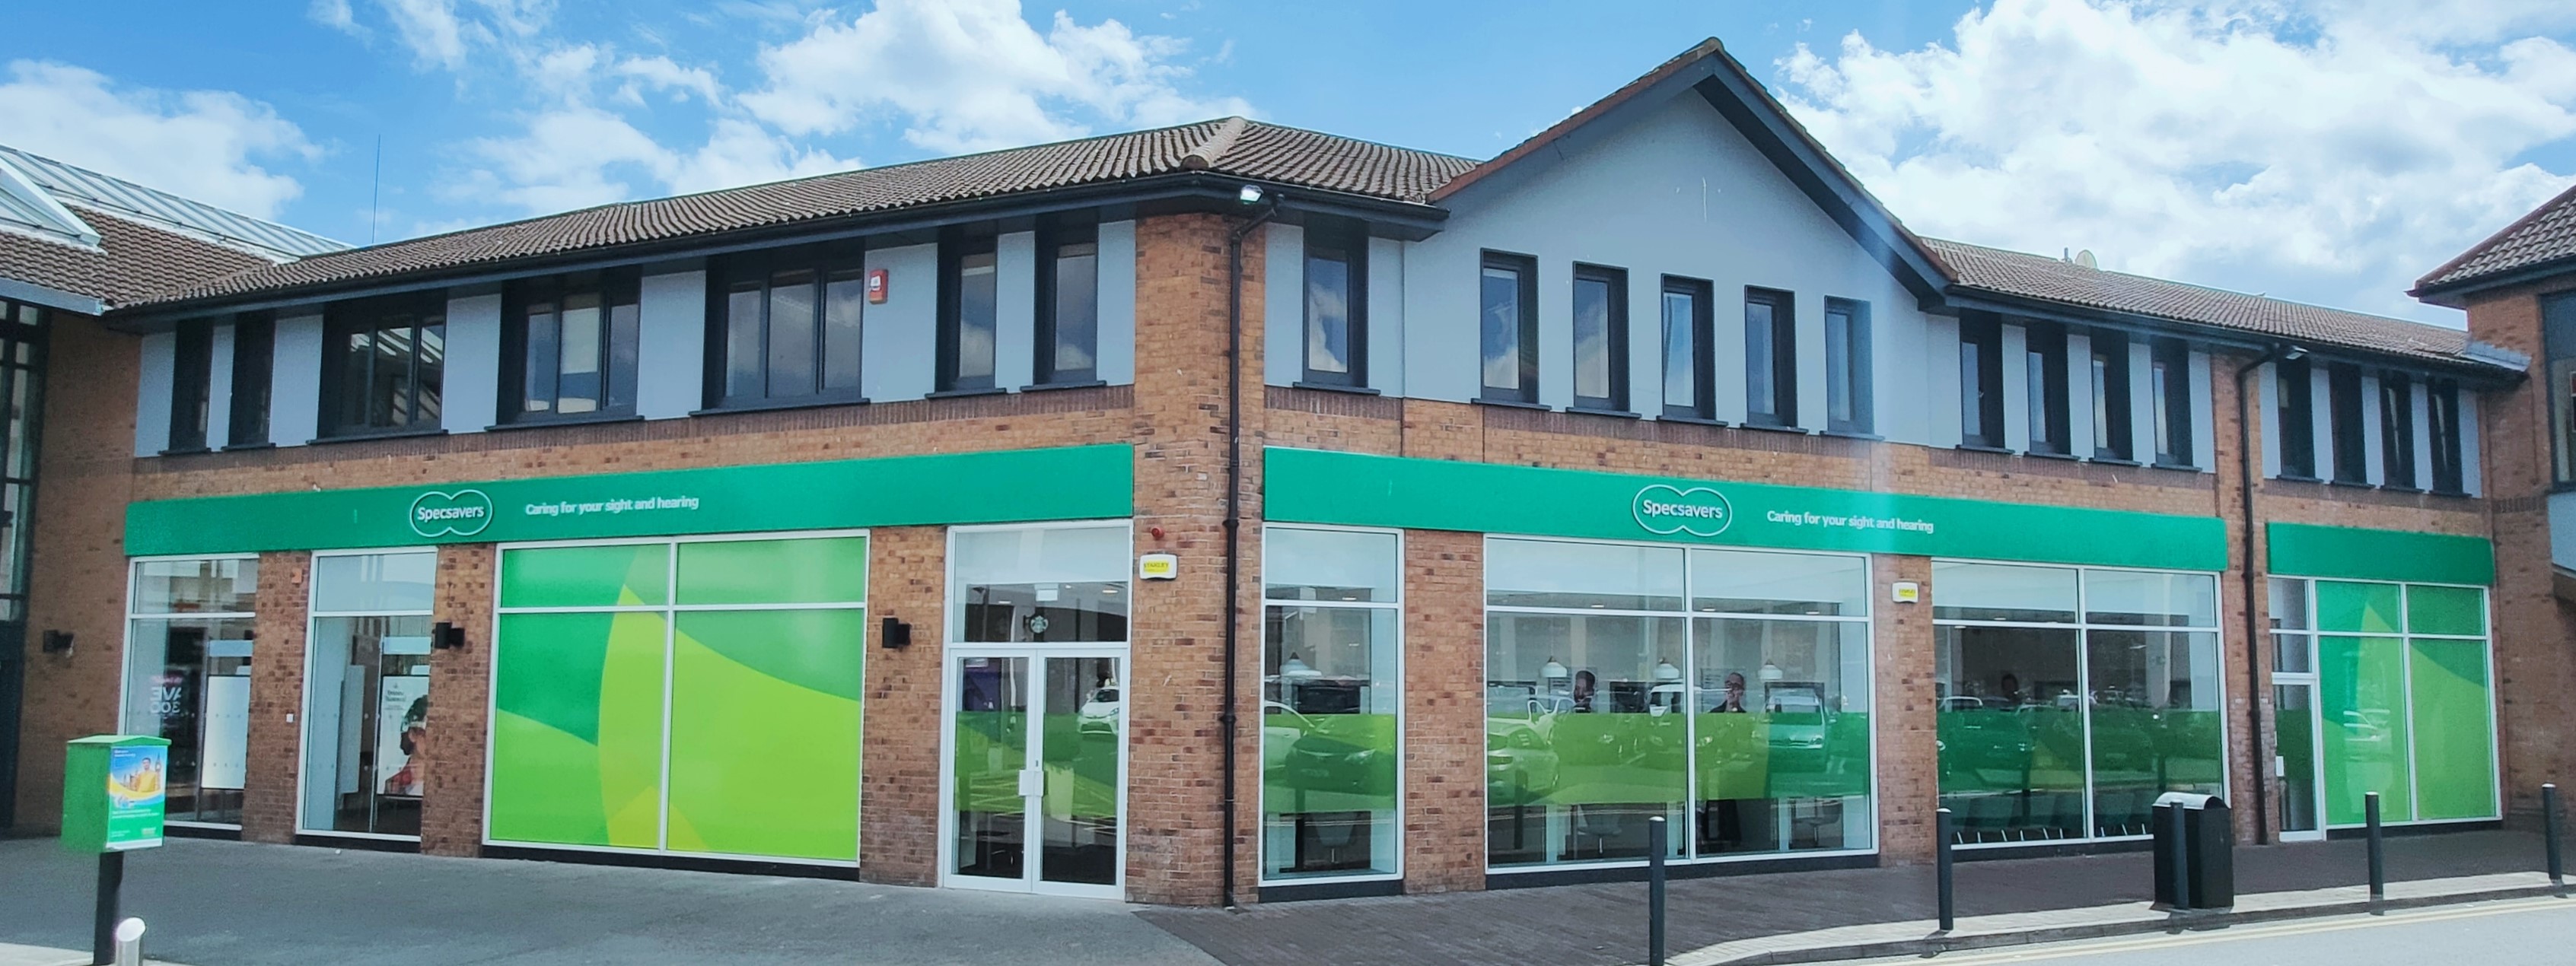 Specsavers Opticians and Audiologists - Santry - Dublin 2